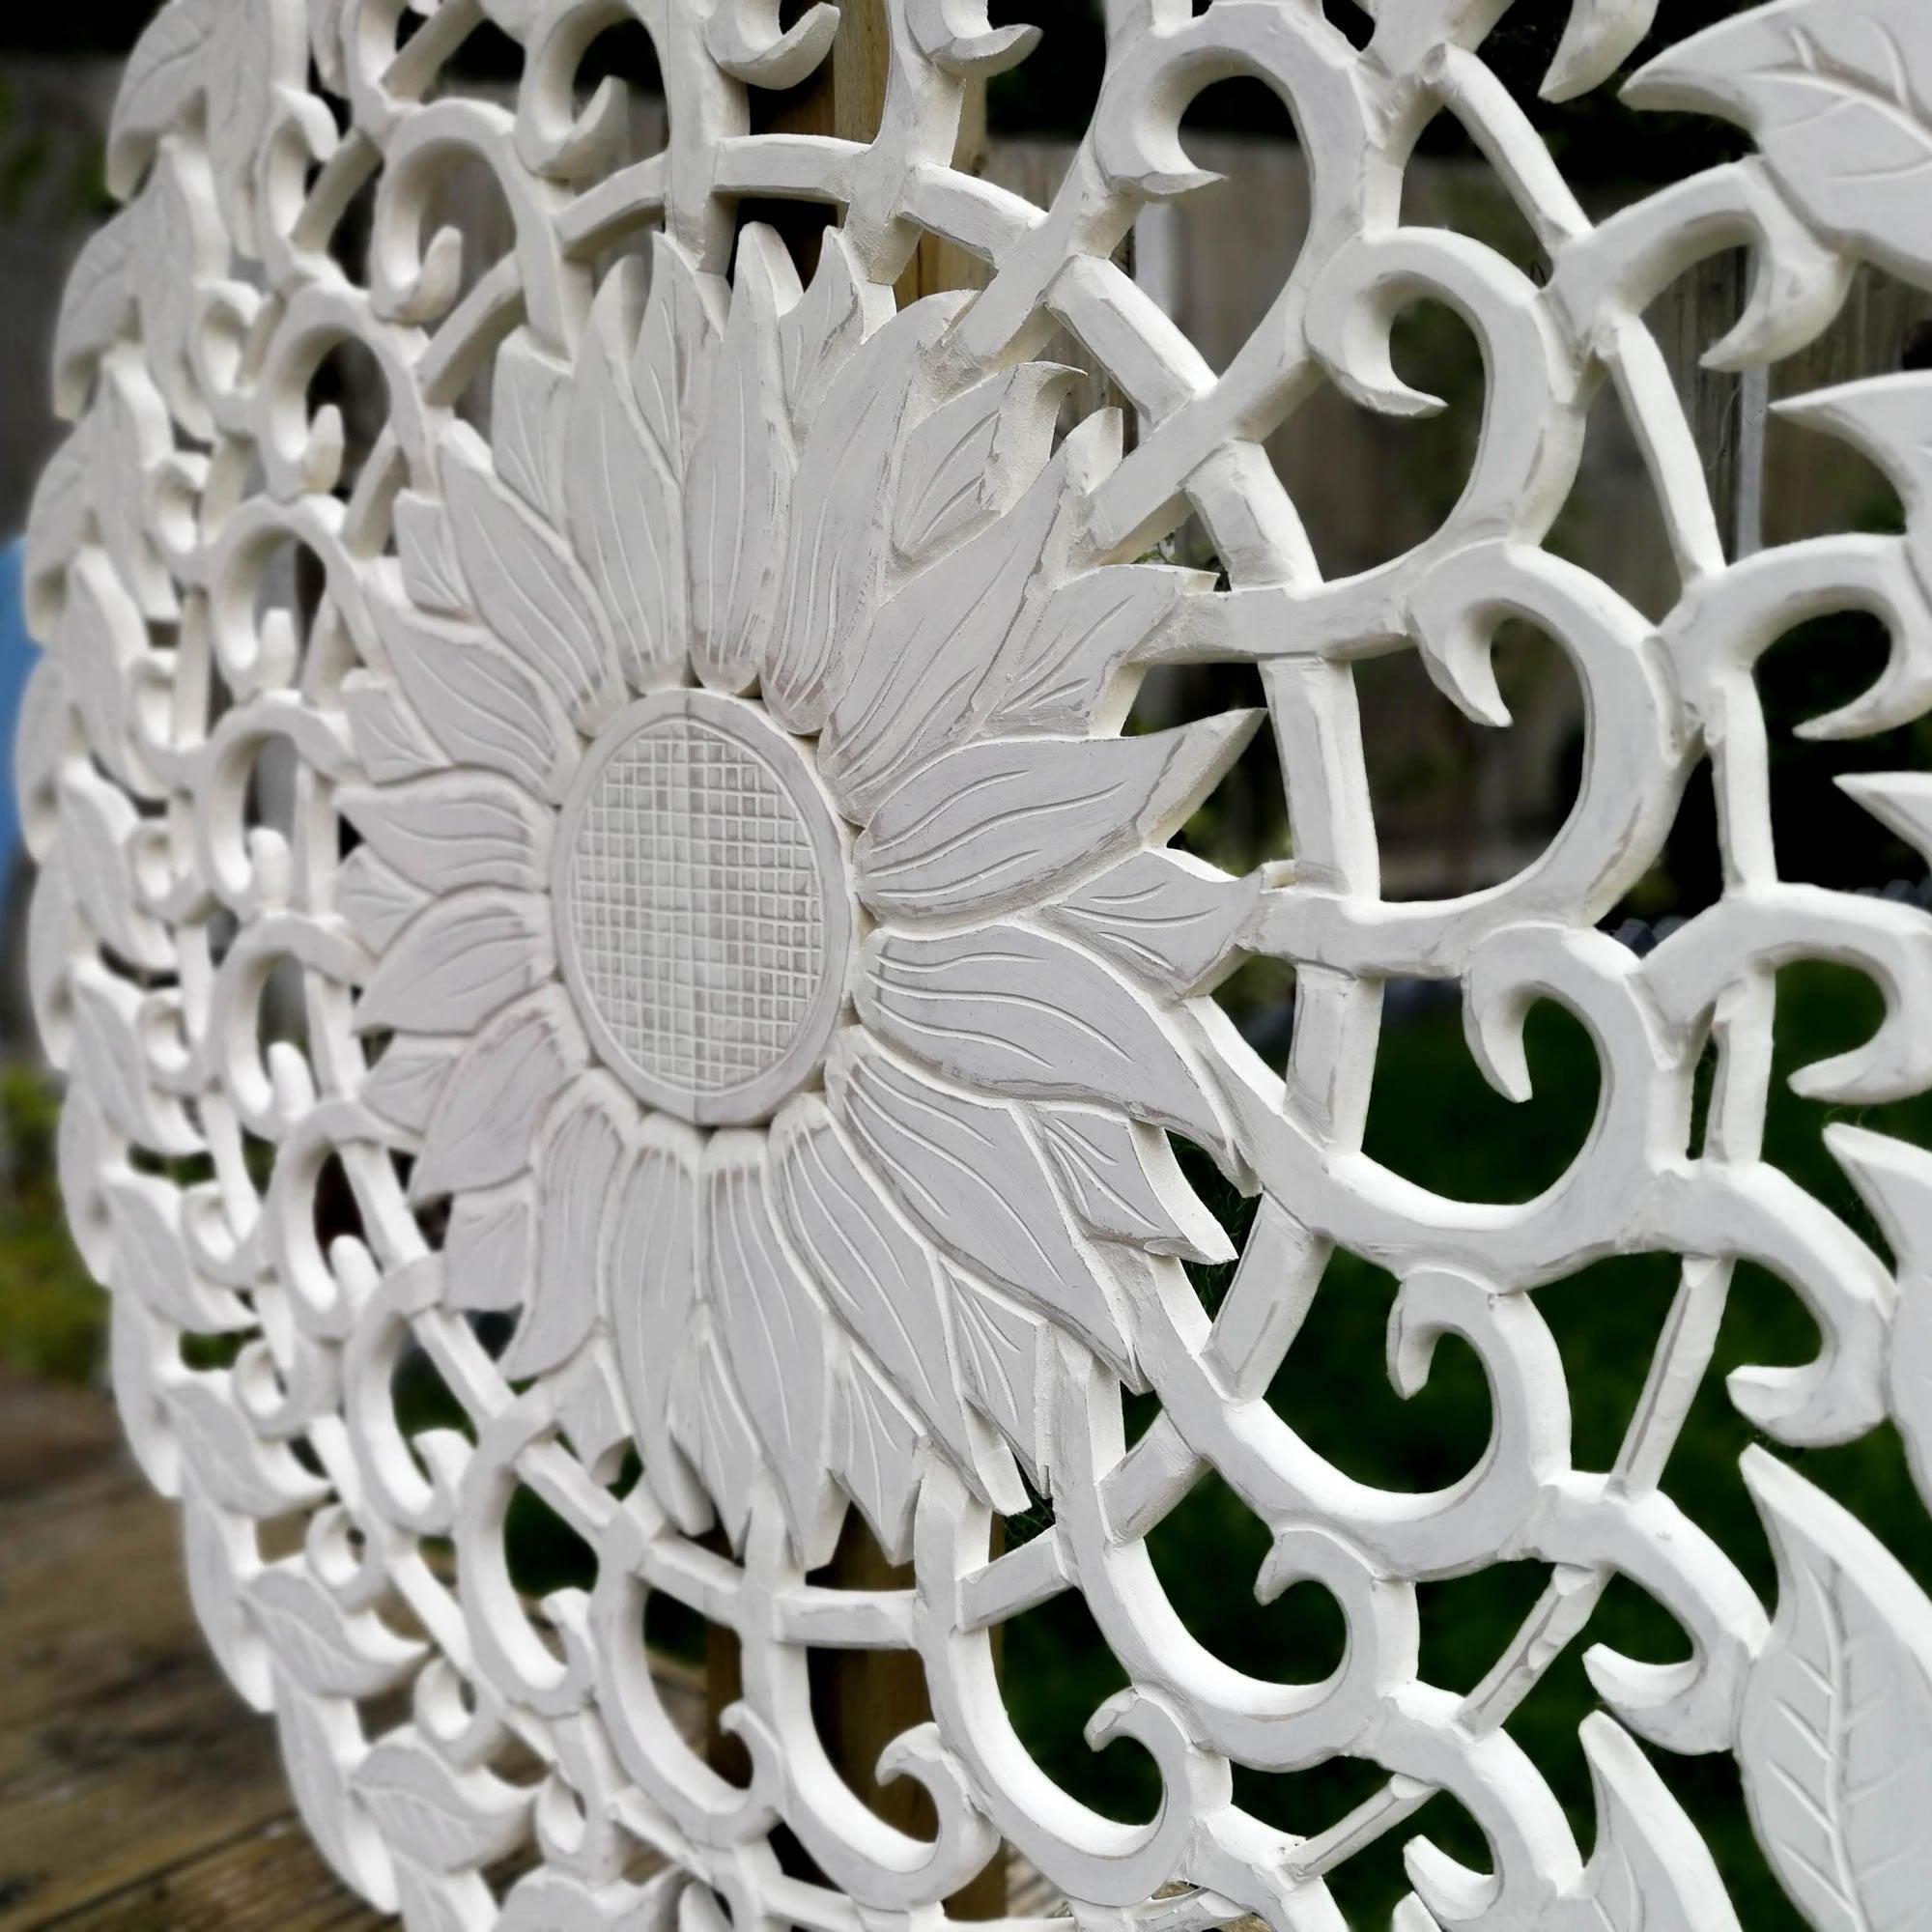 Carved Wooden Wall Art - Large Decorative Mandala Nature Eco Panel Headboard Sculpture 48" inches Round Distressed Shabby Chic White